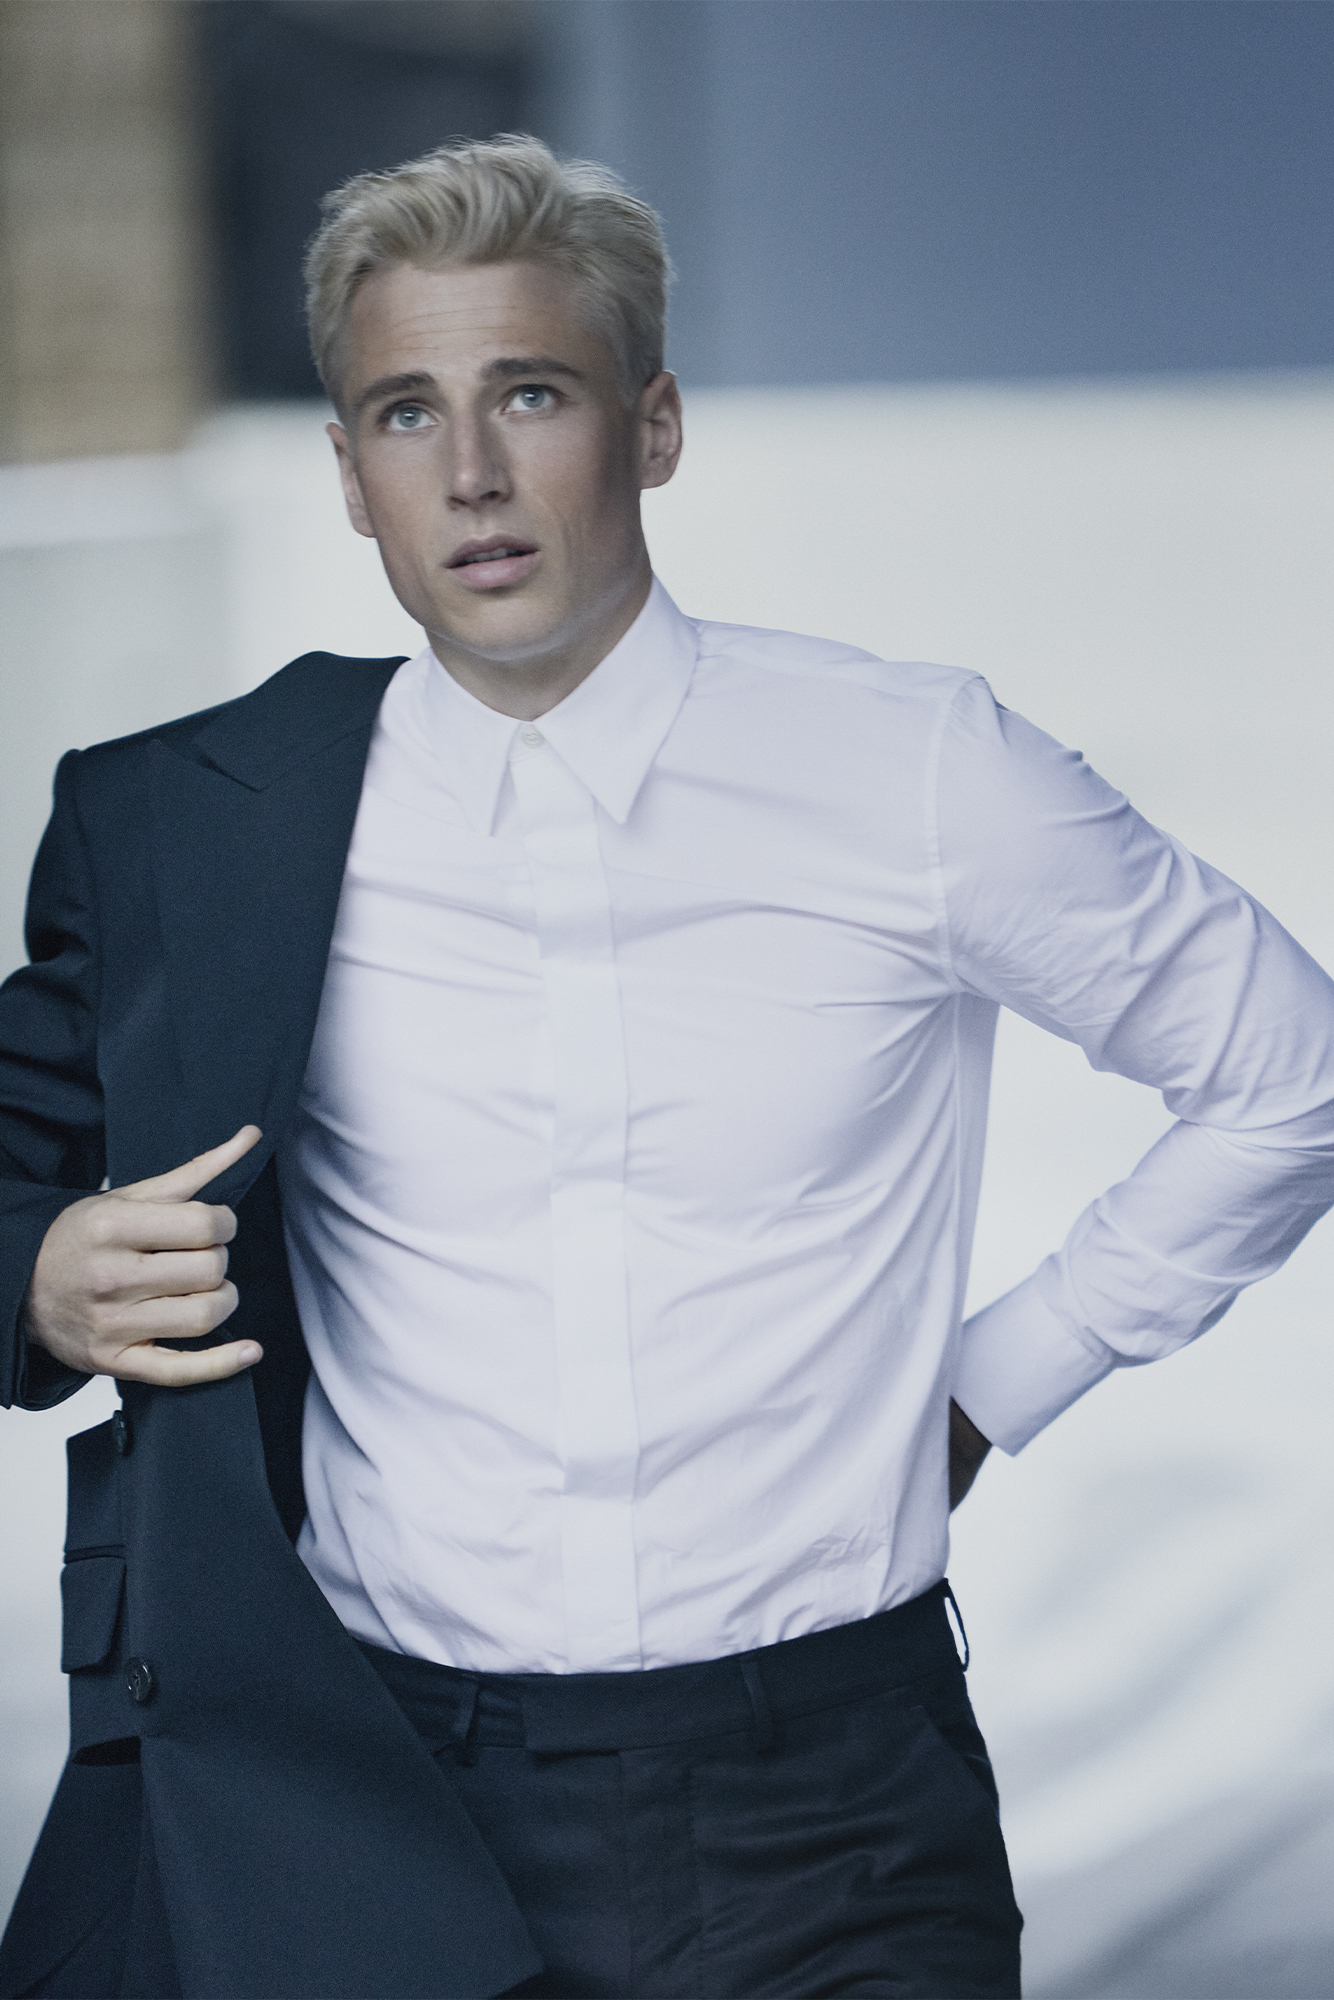 Male model in white shirt putting on a blue jacket and looking up